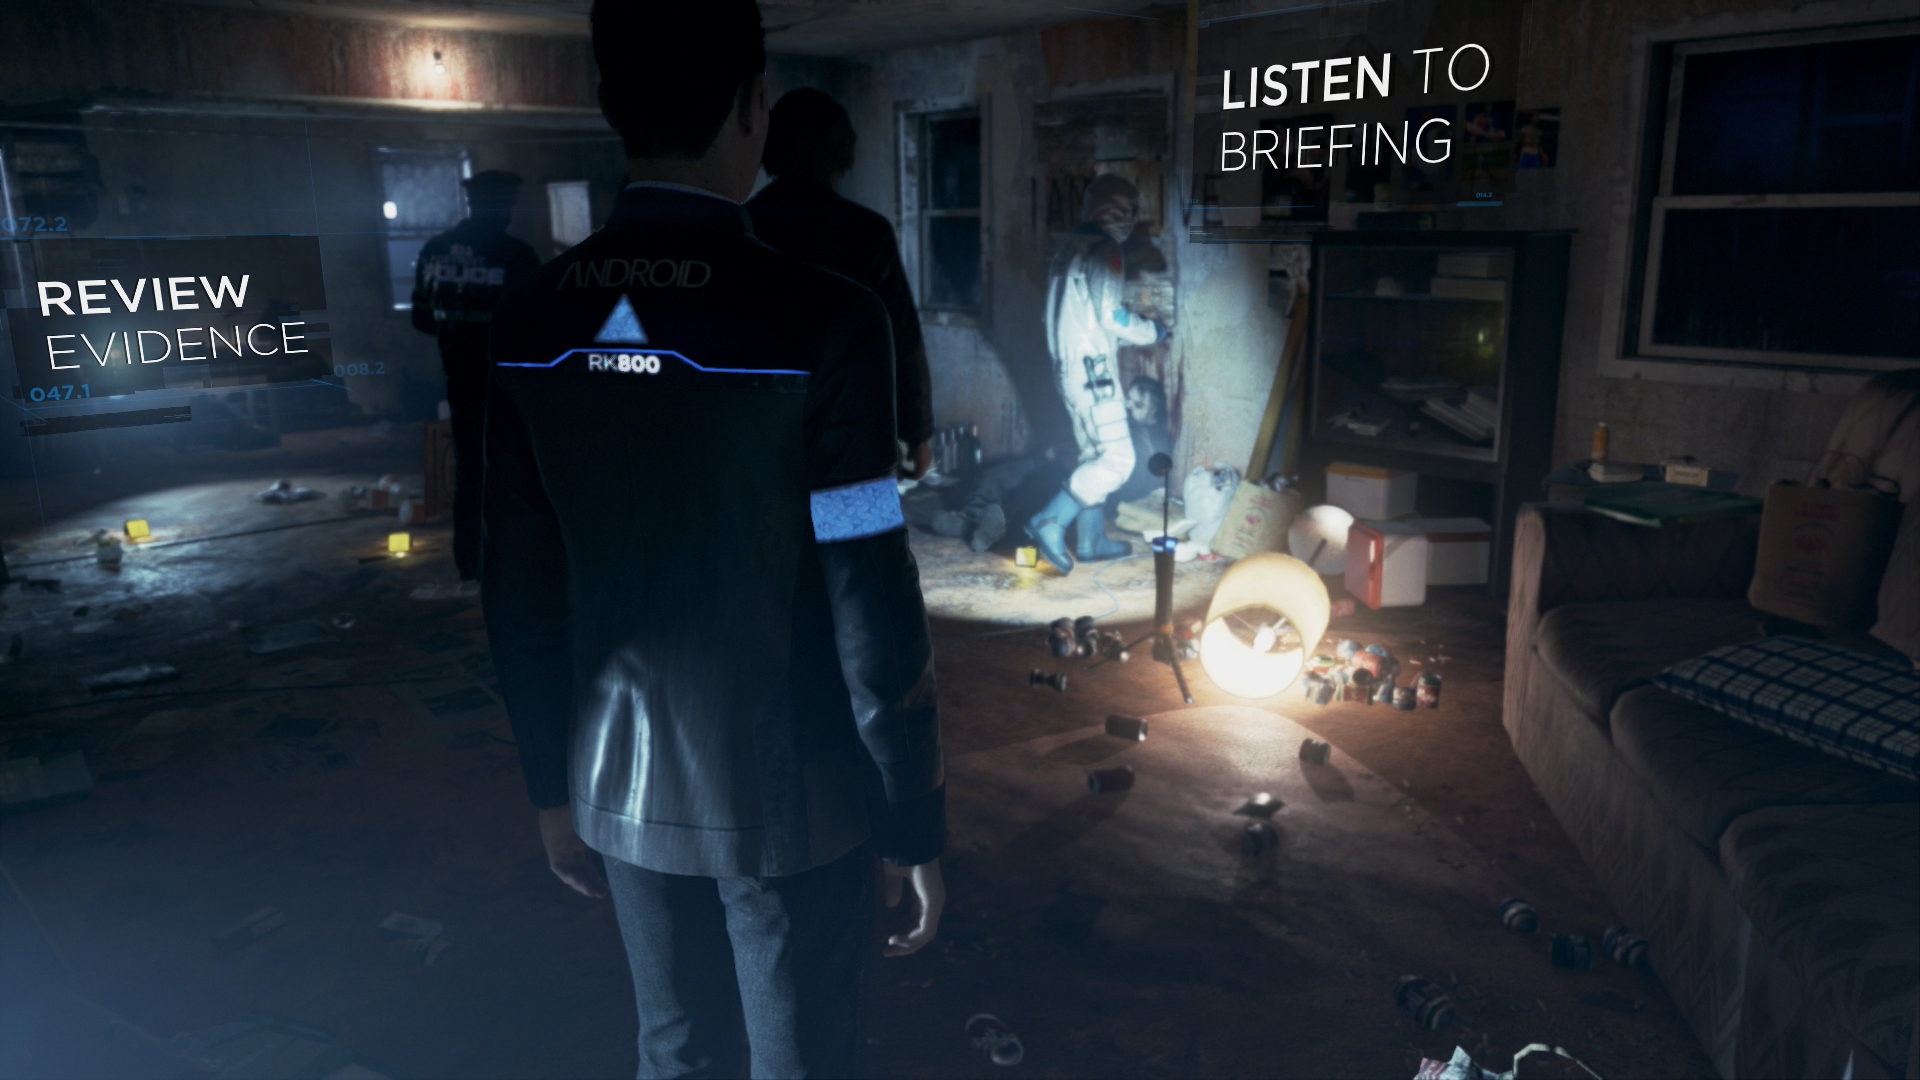 Detroit: Become Human: Inside the new story-based game